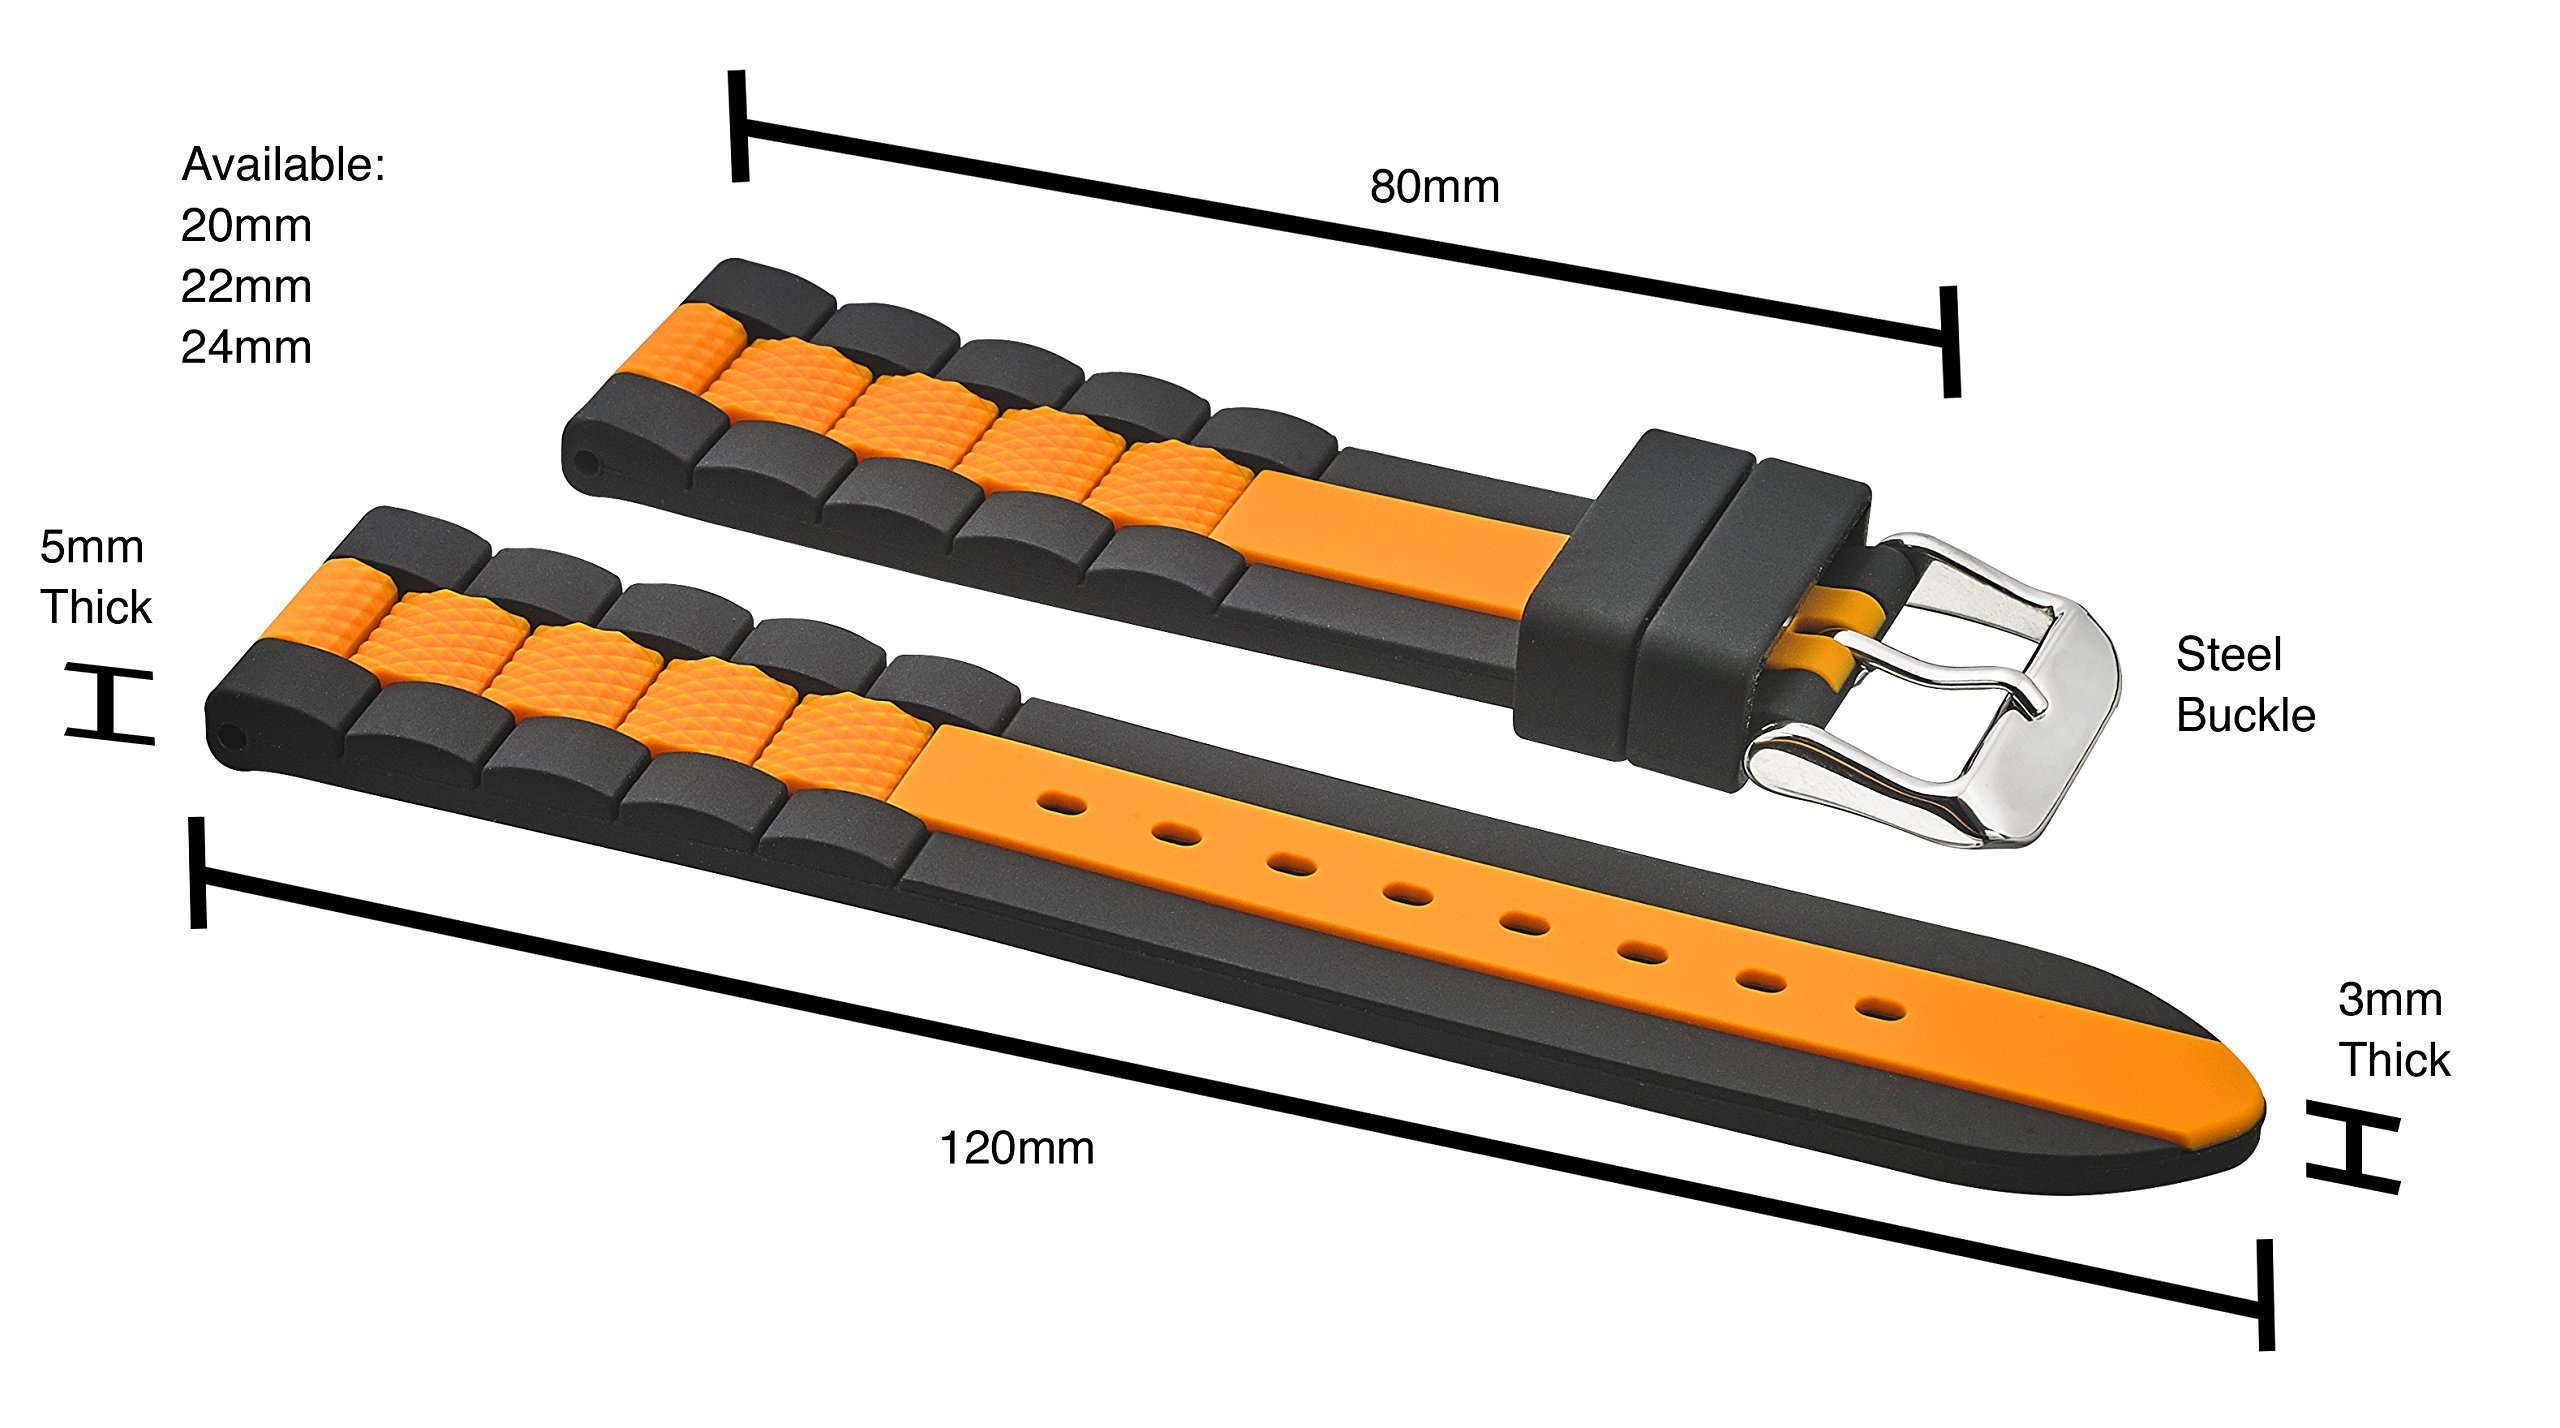 ALPINE Silicone sporty waterproof watch band - Sizes 20mm, 22mm & 24mm